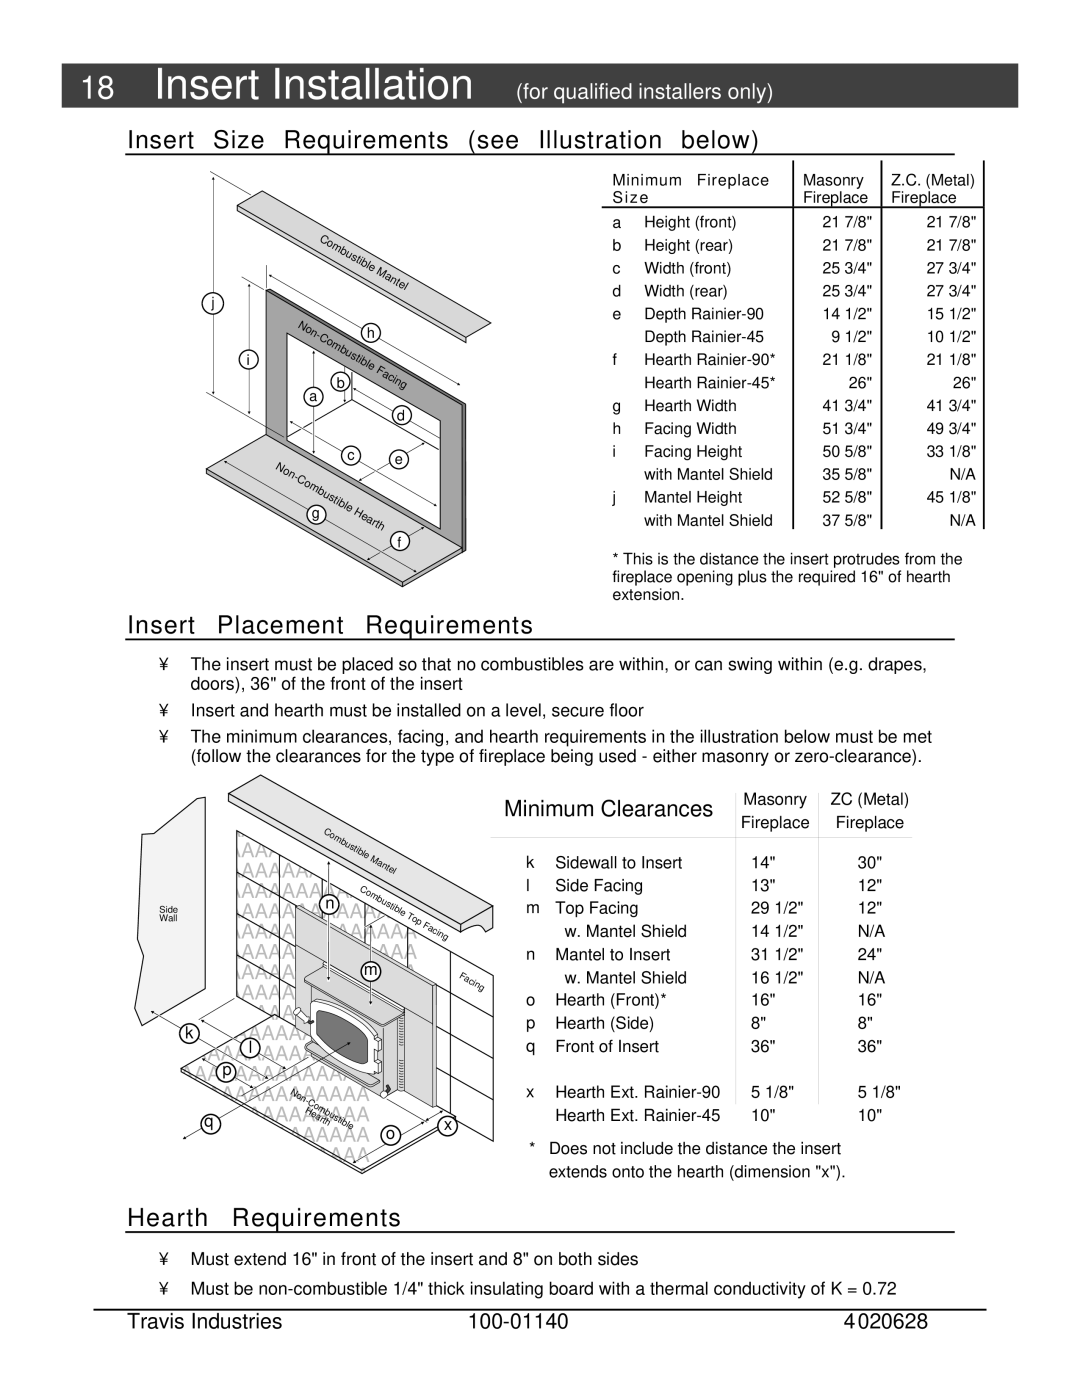 Avalon Stoves Rainier Insert Size Requirements see Illustration below, Insert Placement Requirements, Hearth Requirements 